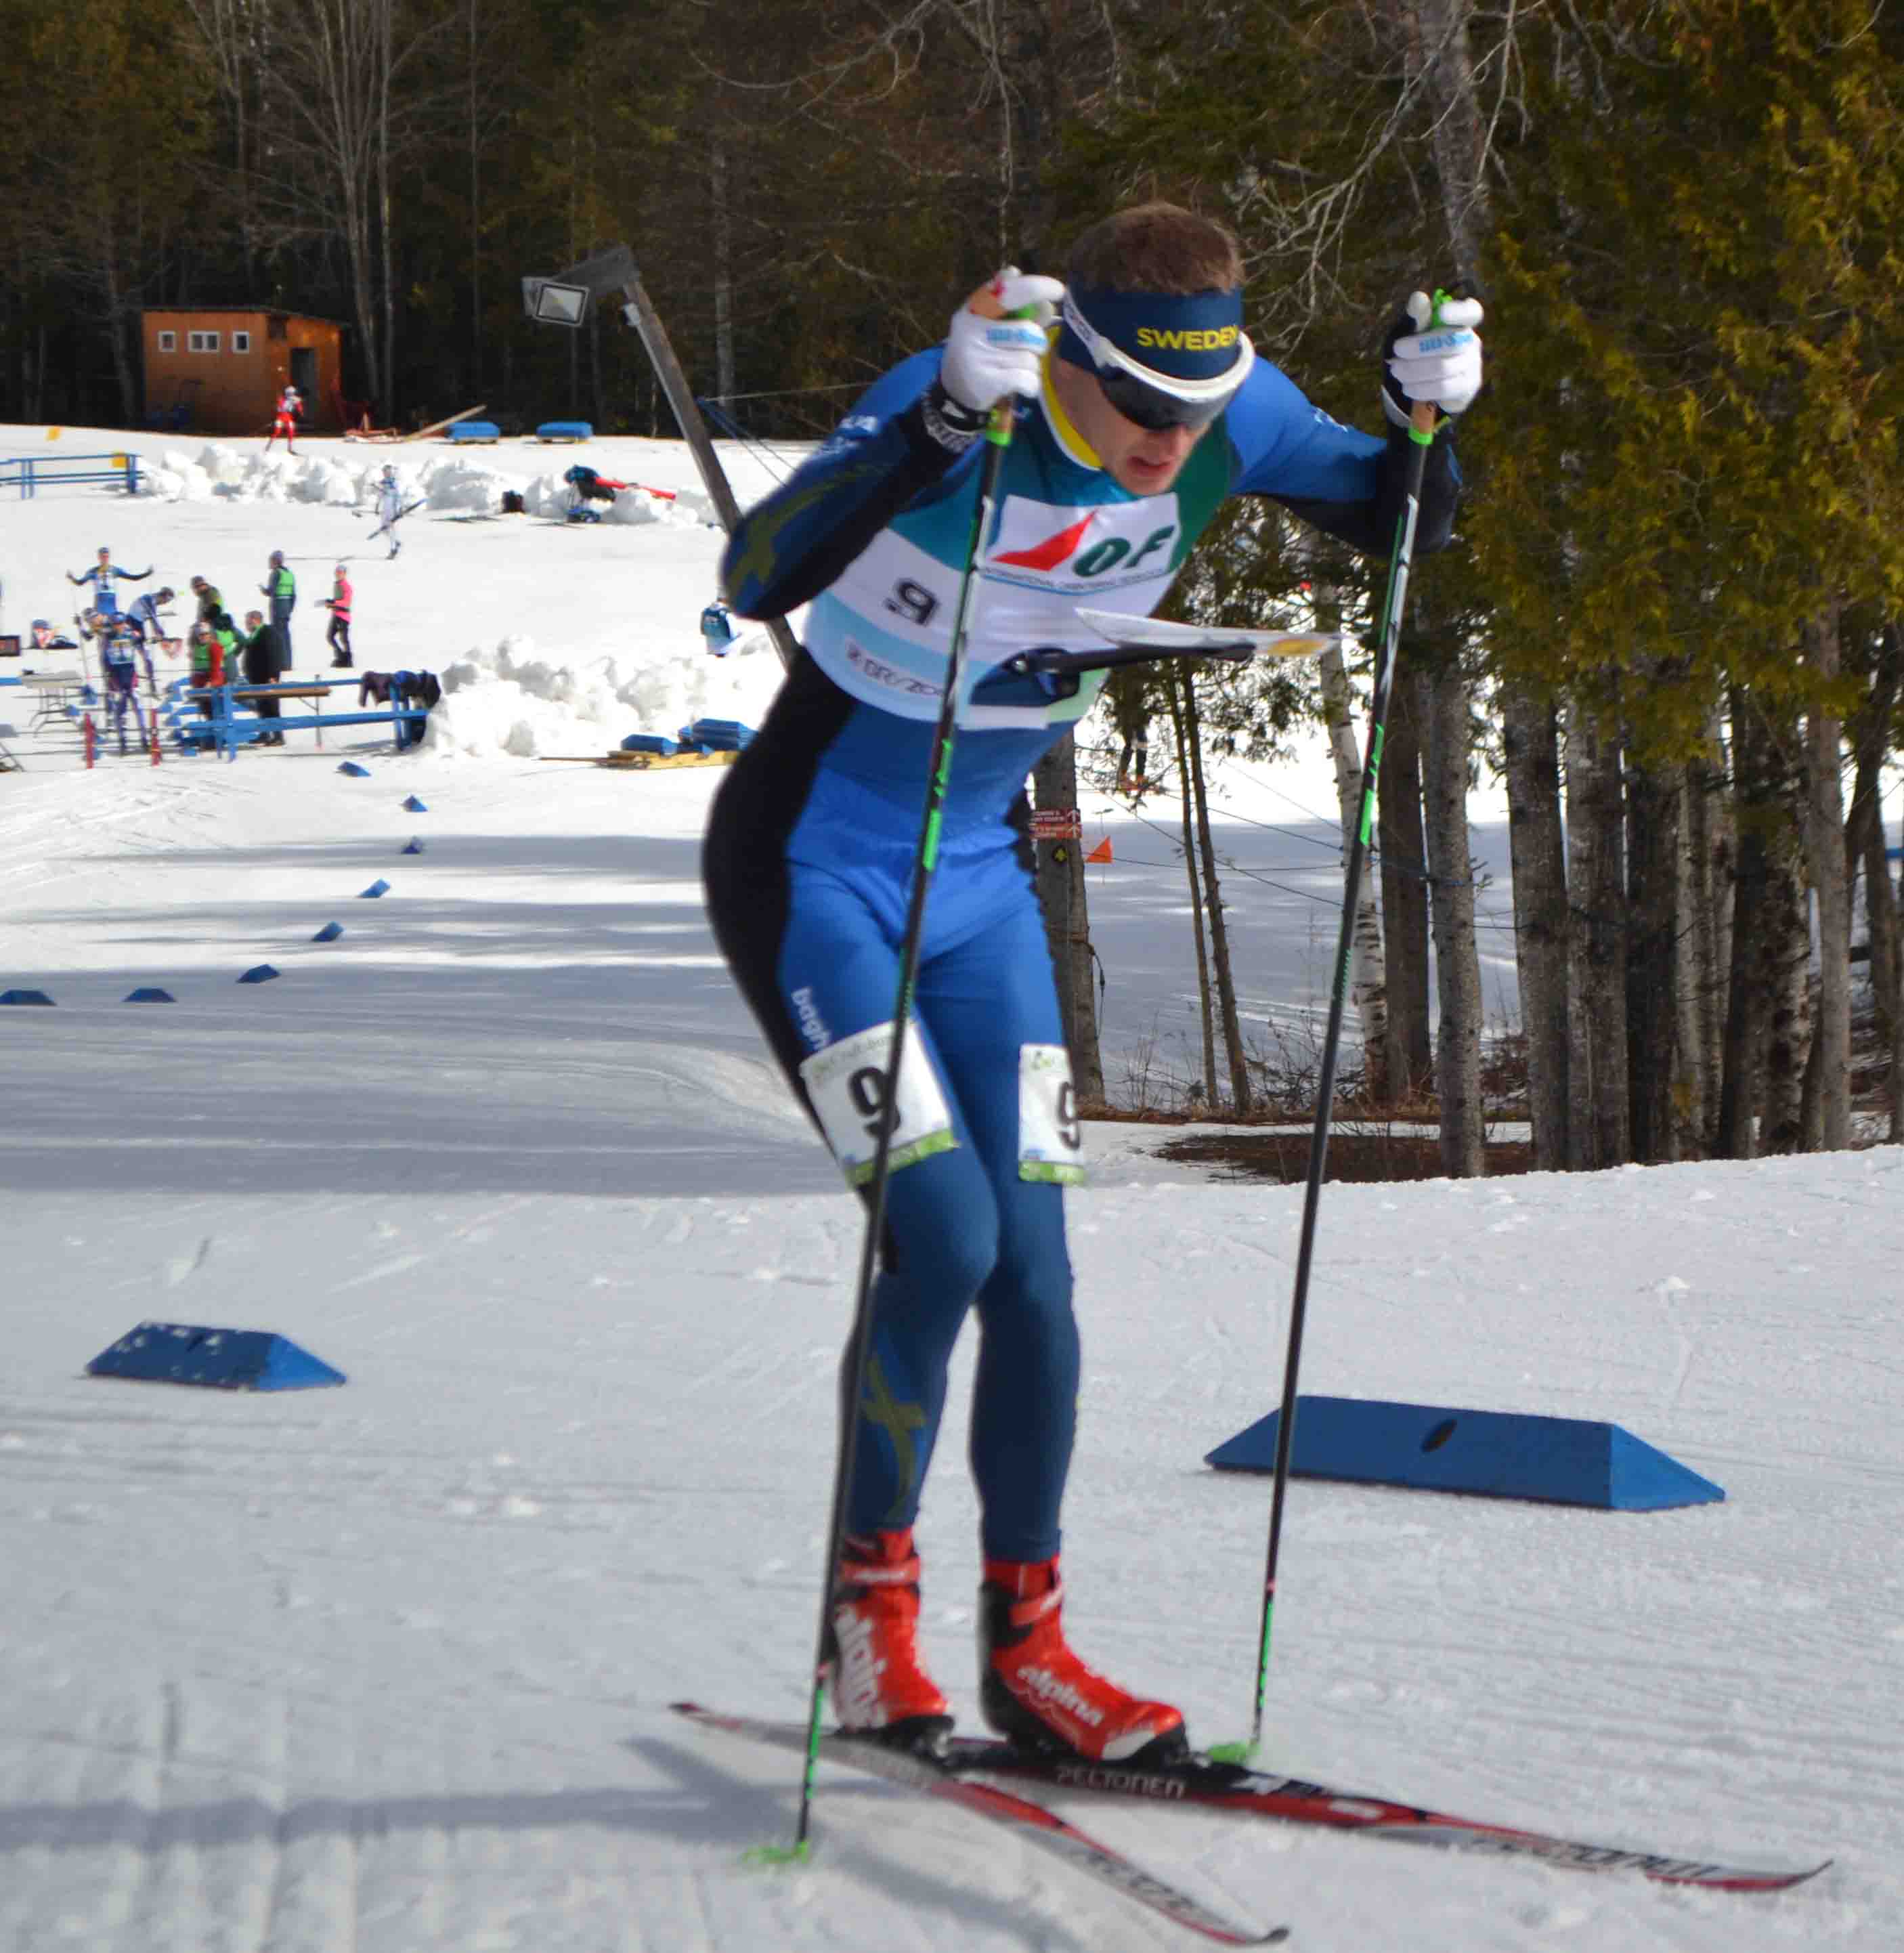 Intro to Ski-O as Craftsbury World Cup, World Masters Champs Begin